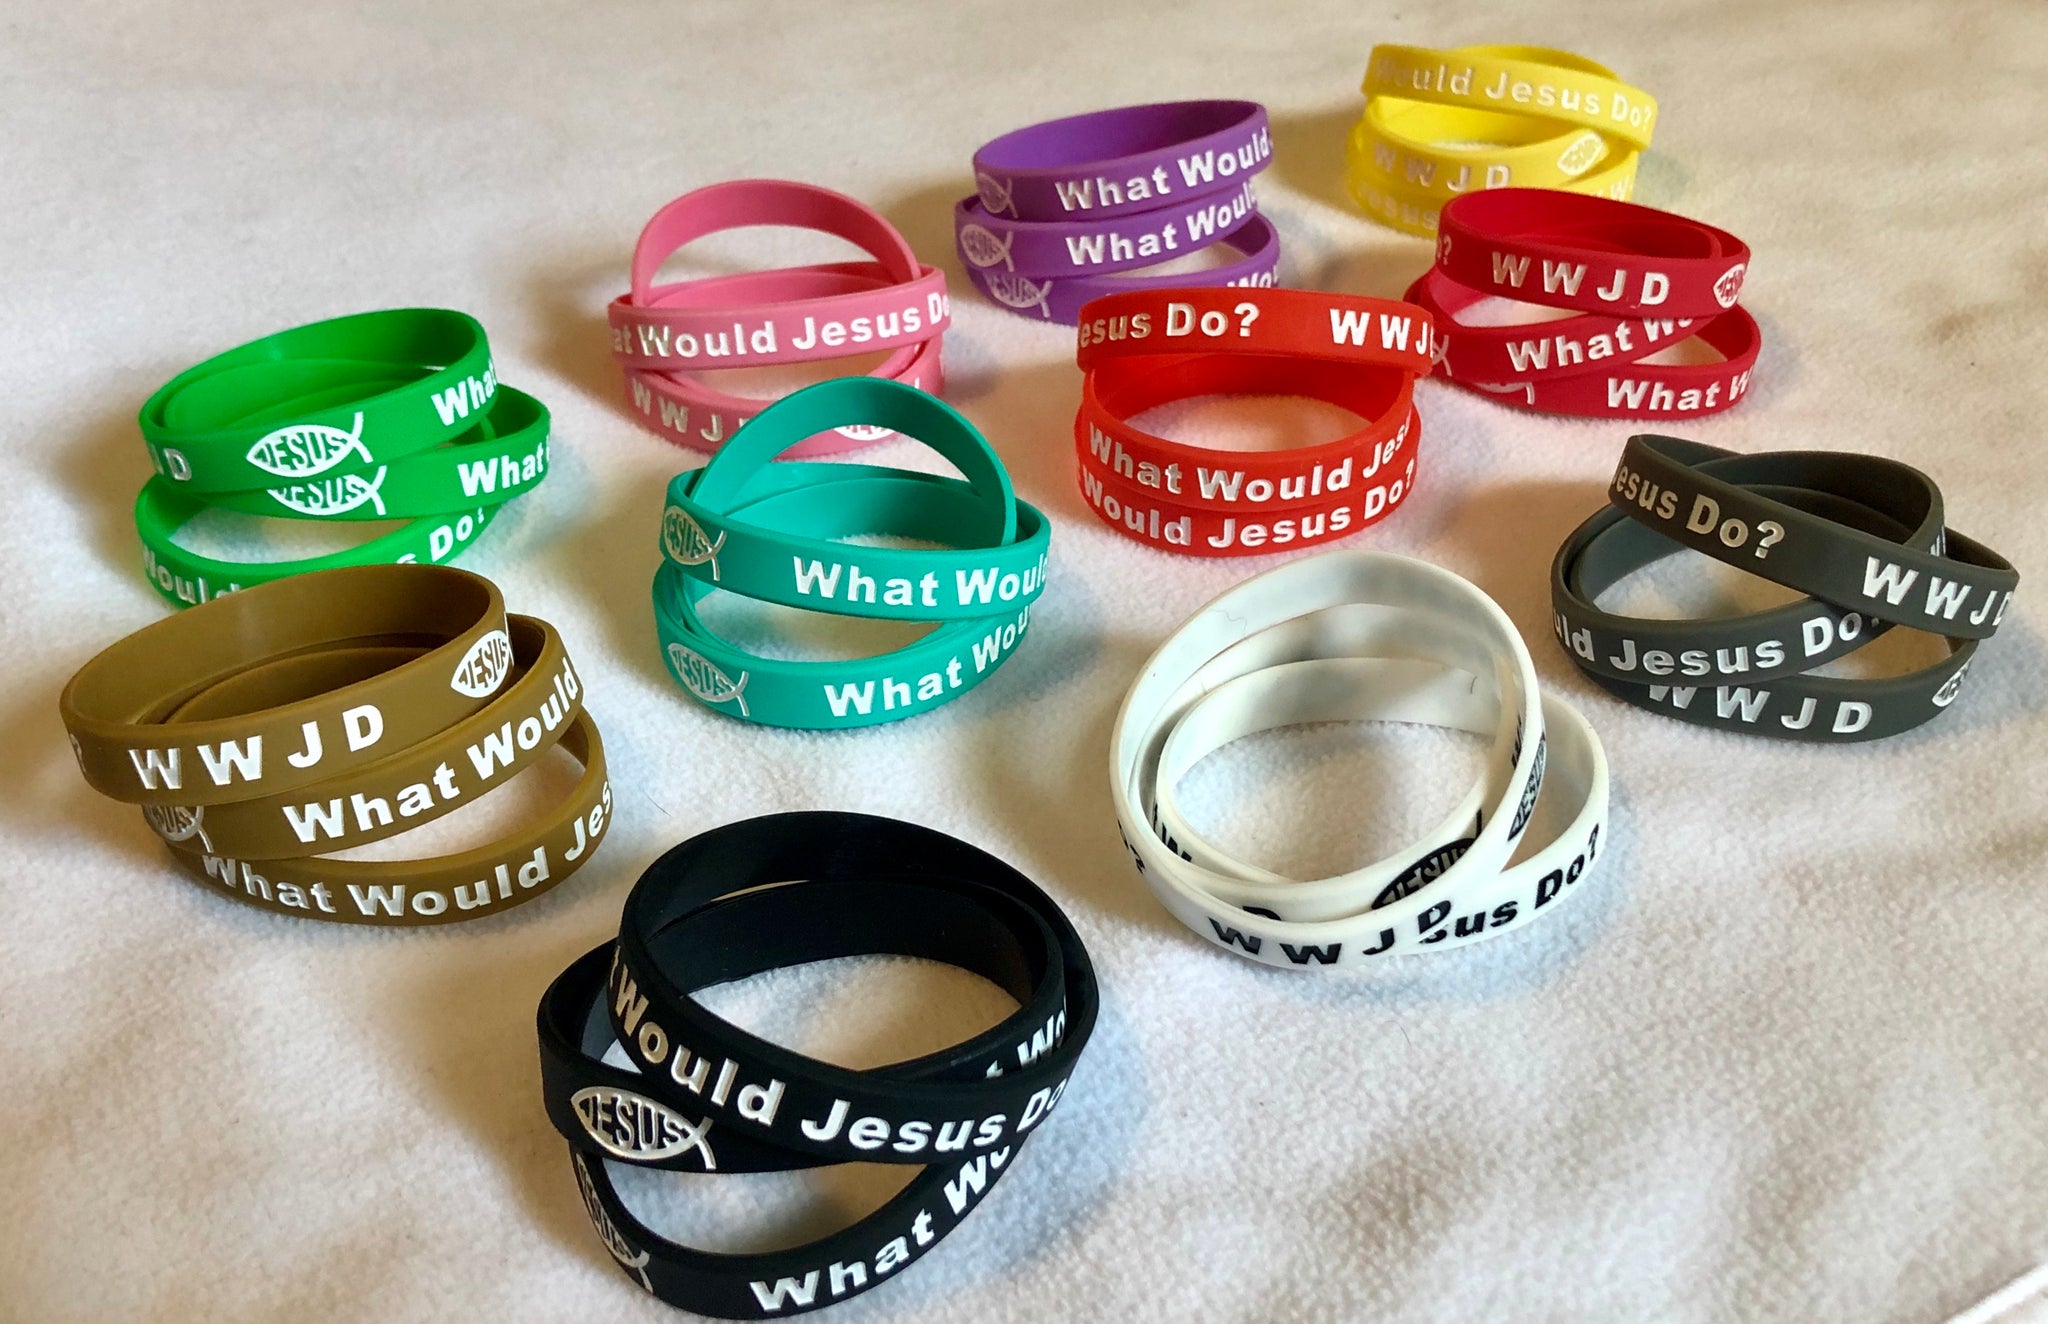 Silicone wristbands custom print | Cheap from € 0.10 | Dinilu, online  quotations for quality custom products